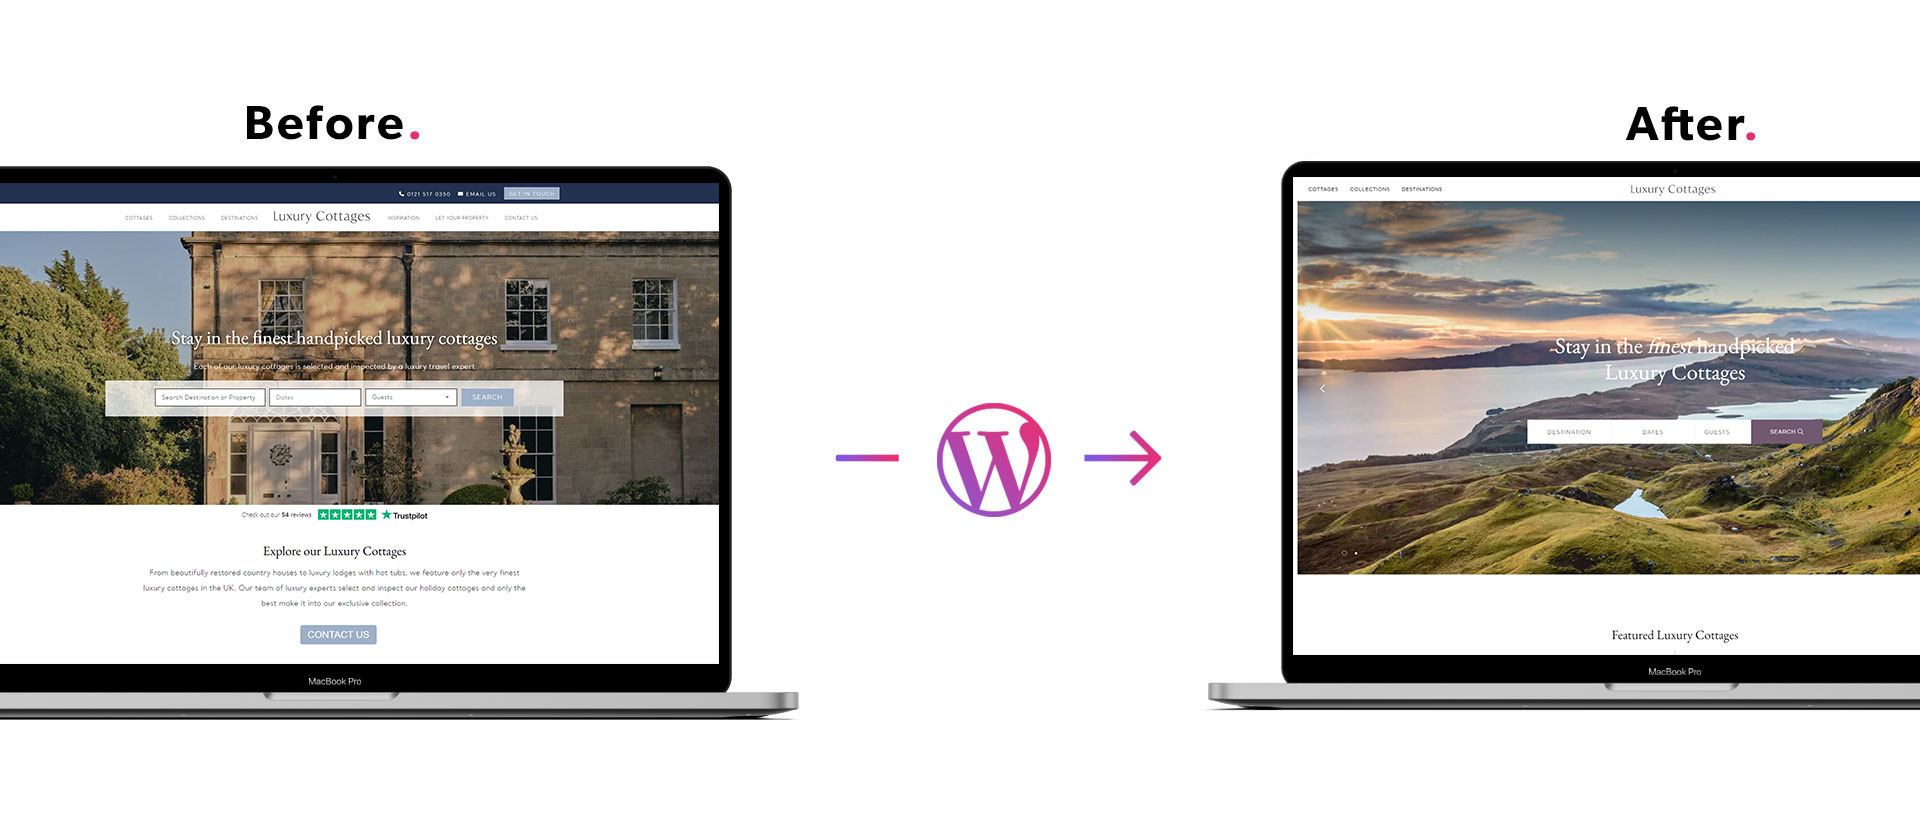 Before and after photo of Luxury Cottages website, displayed on two laptops with an arrow and wordpress logo in between them